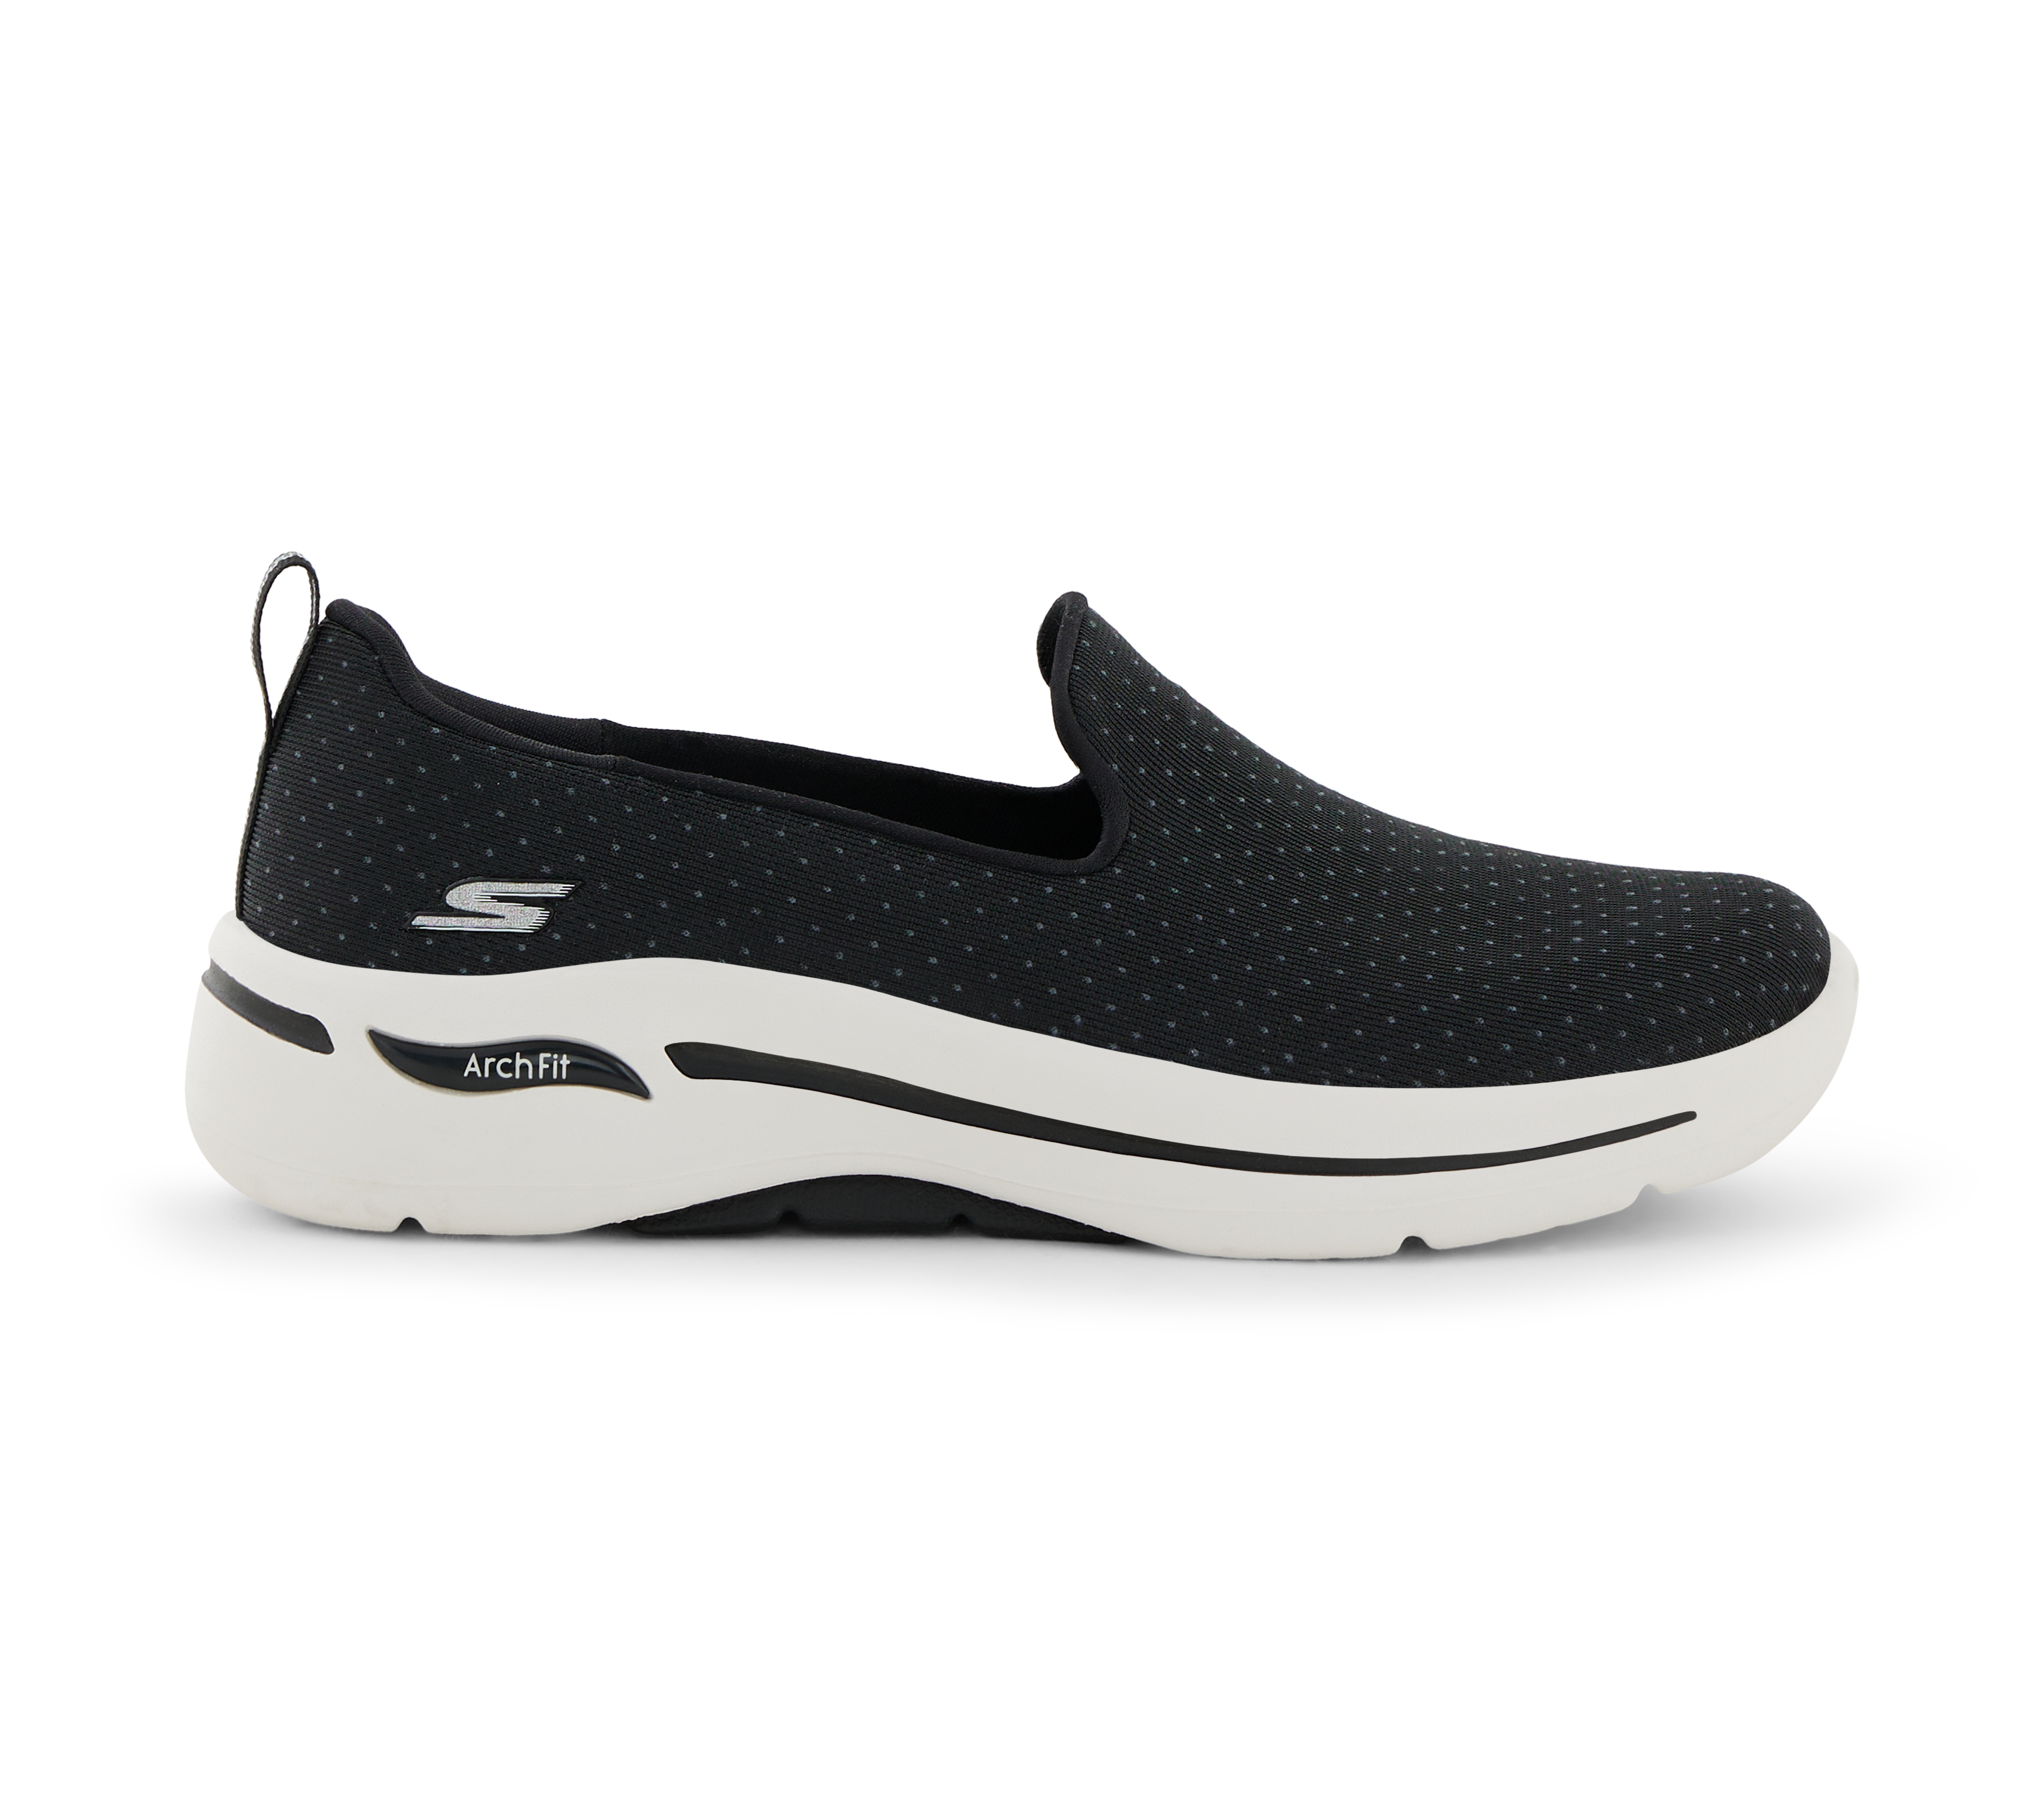 GO WALK ARCH FIT - MORNING ST, BLACK/WHITE Footwear Right View